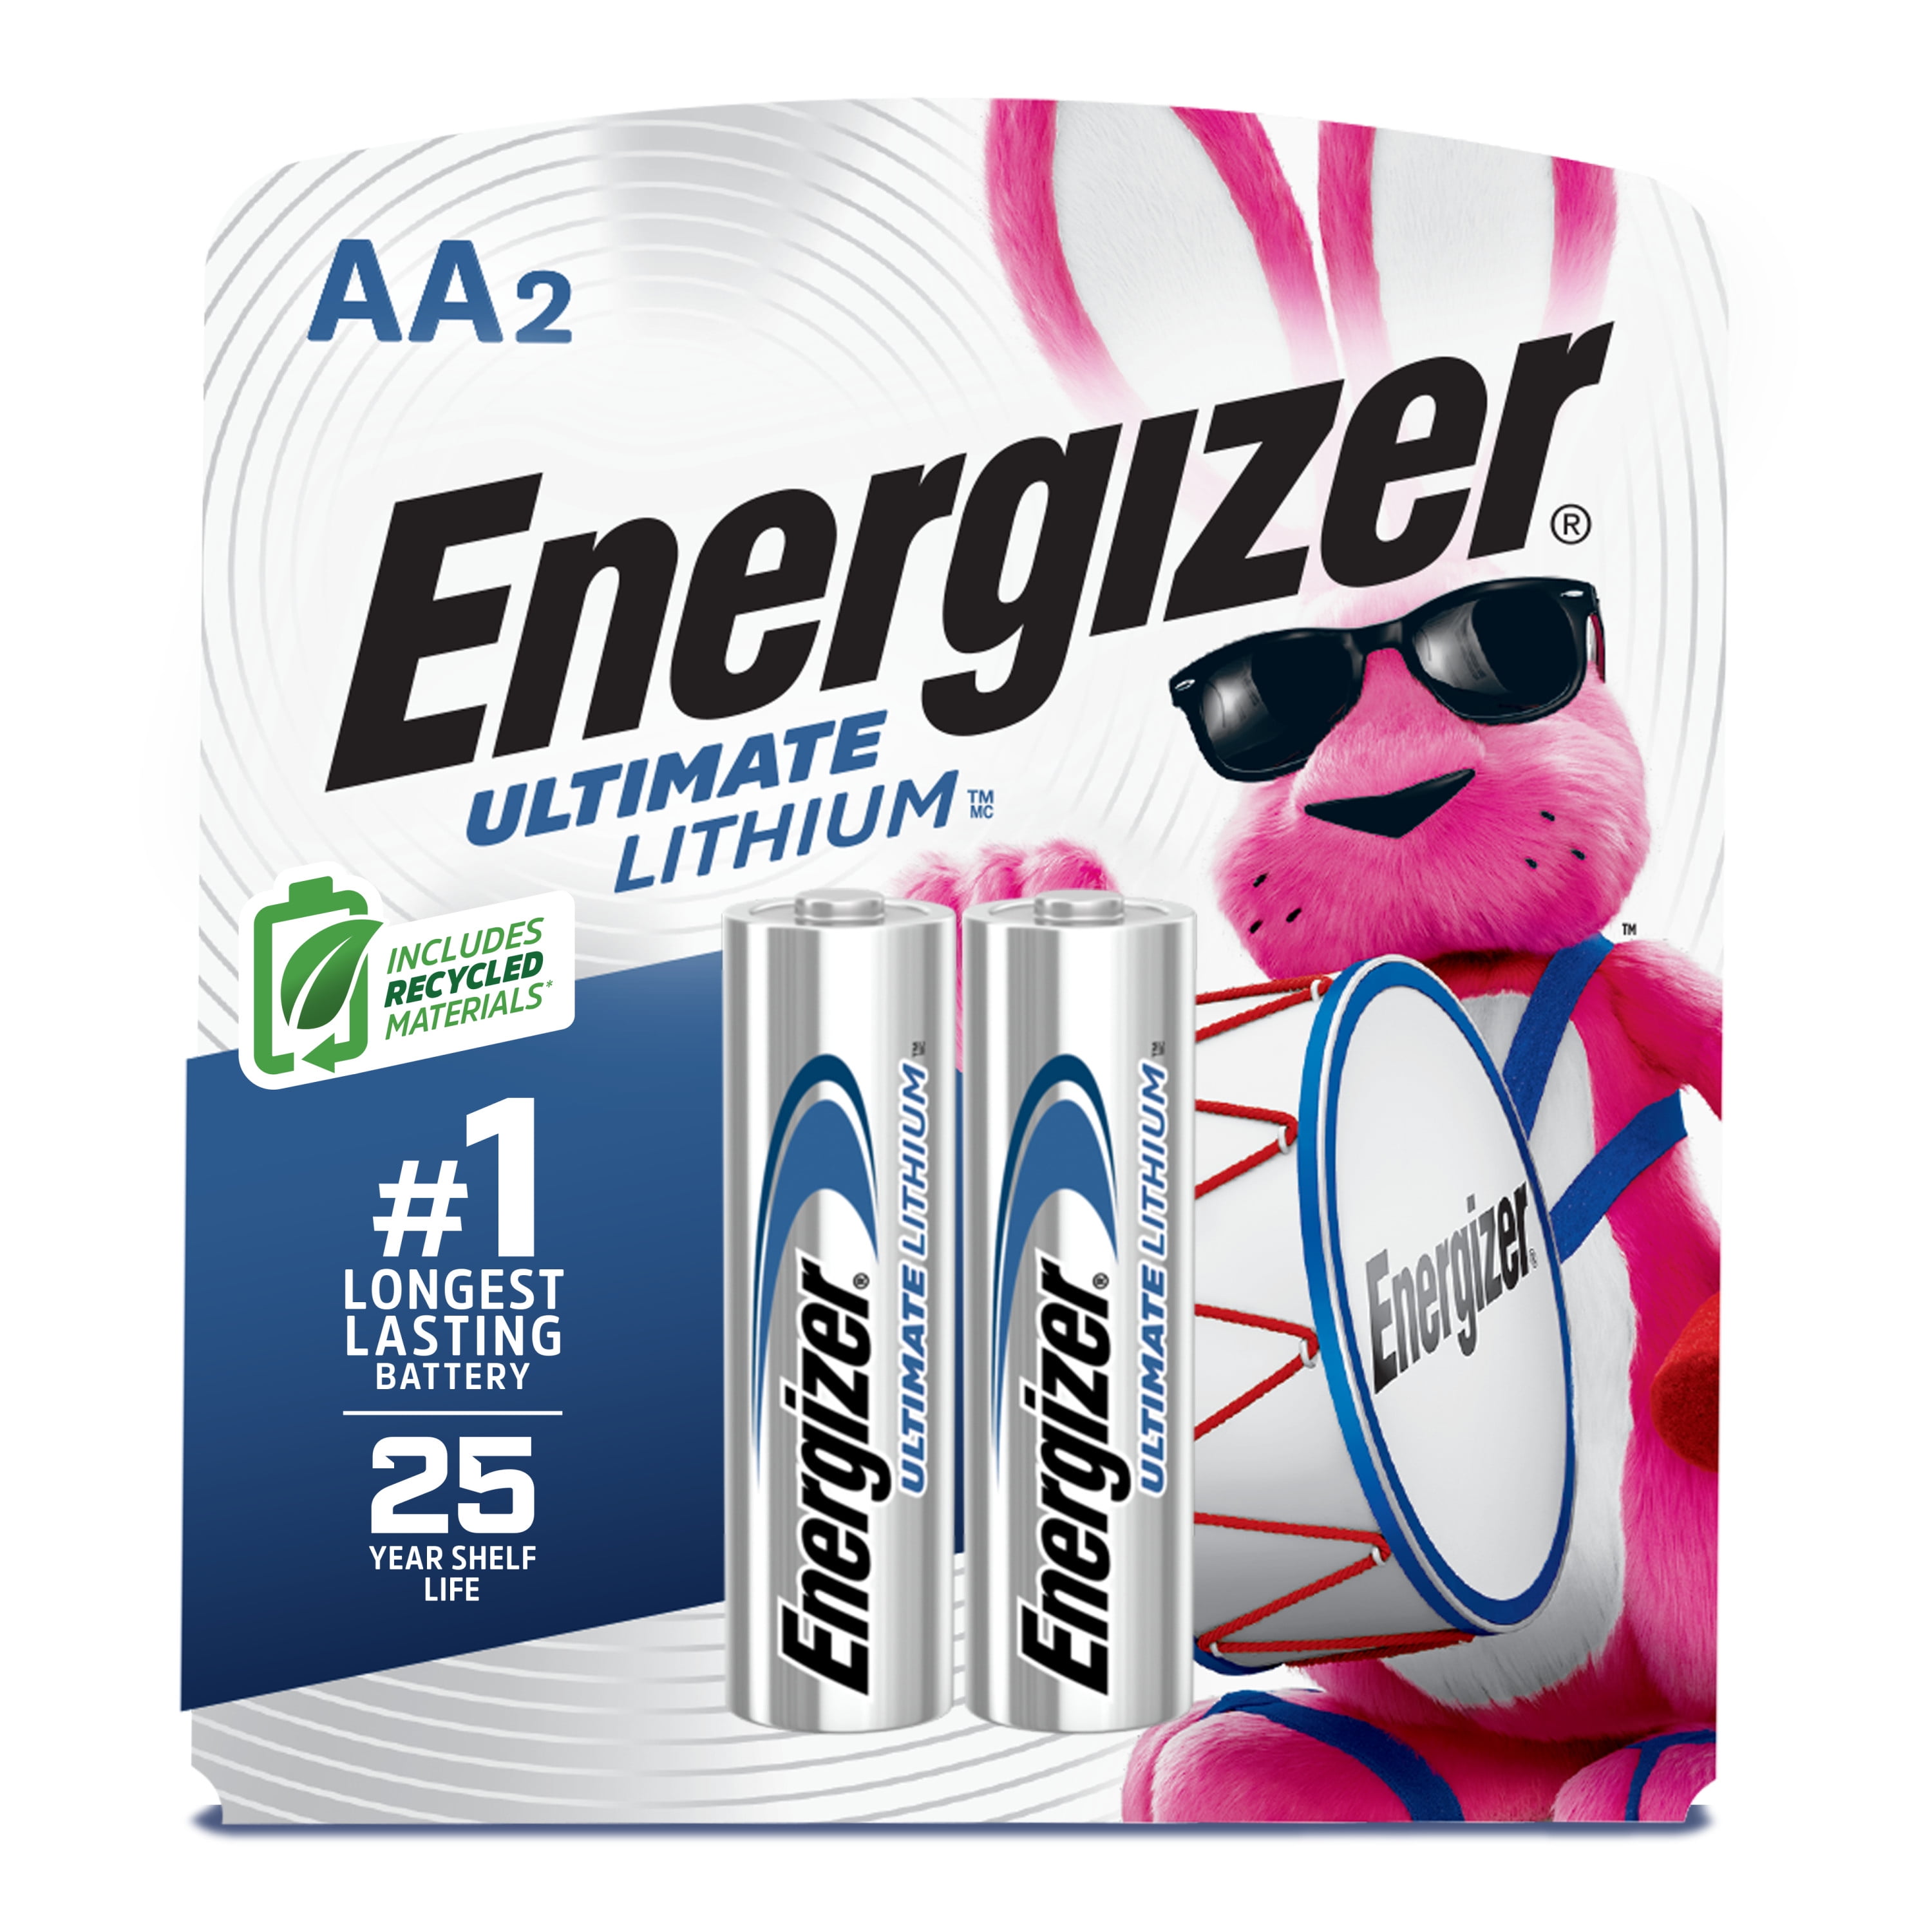 Energizer Ultimate Lithium AA Batteries (2 Pack), Double A